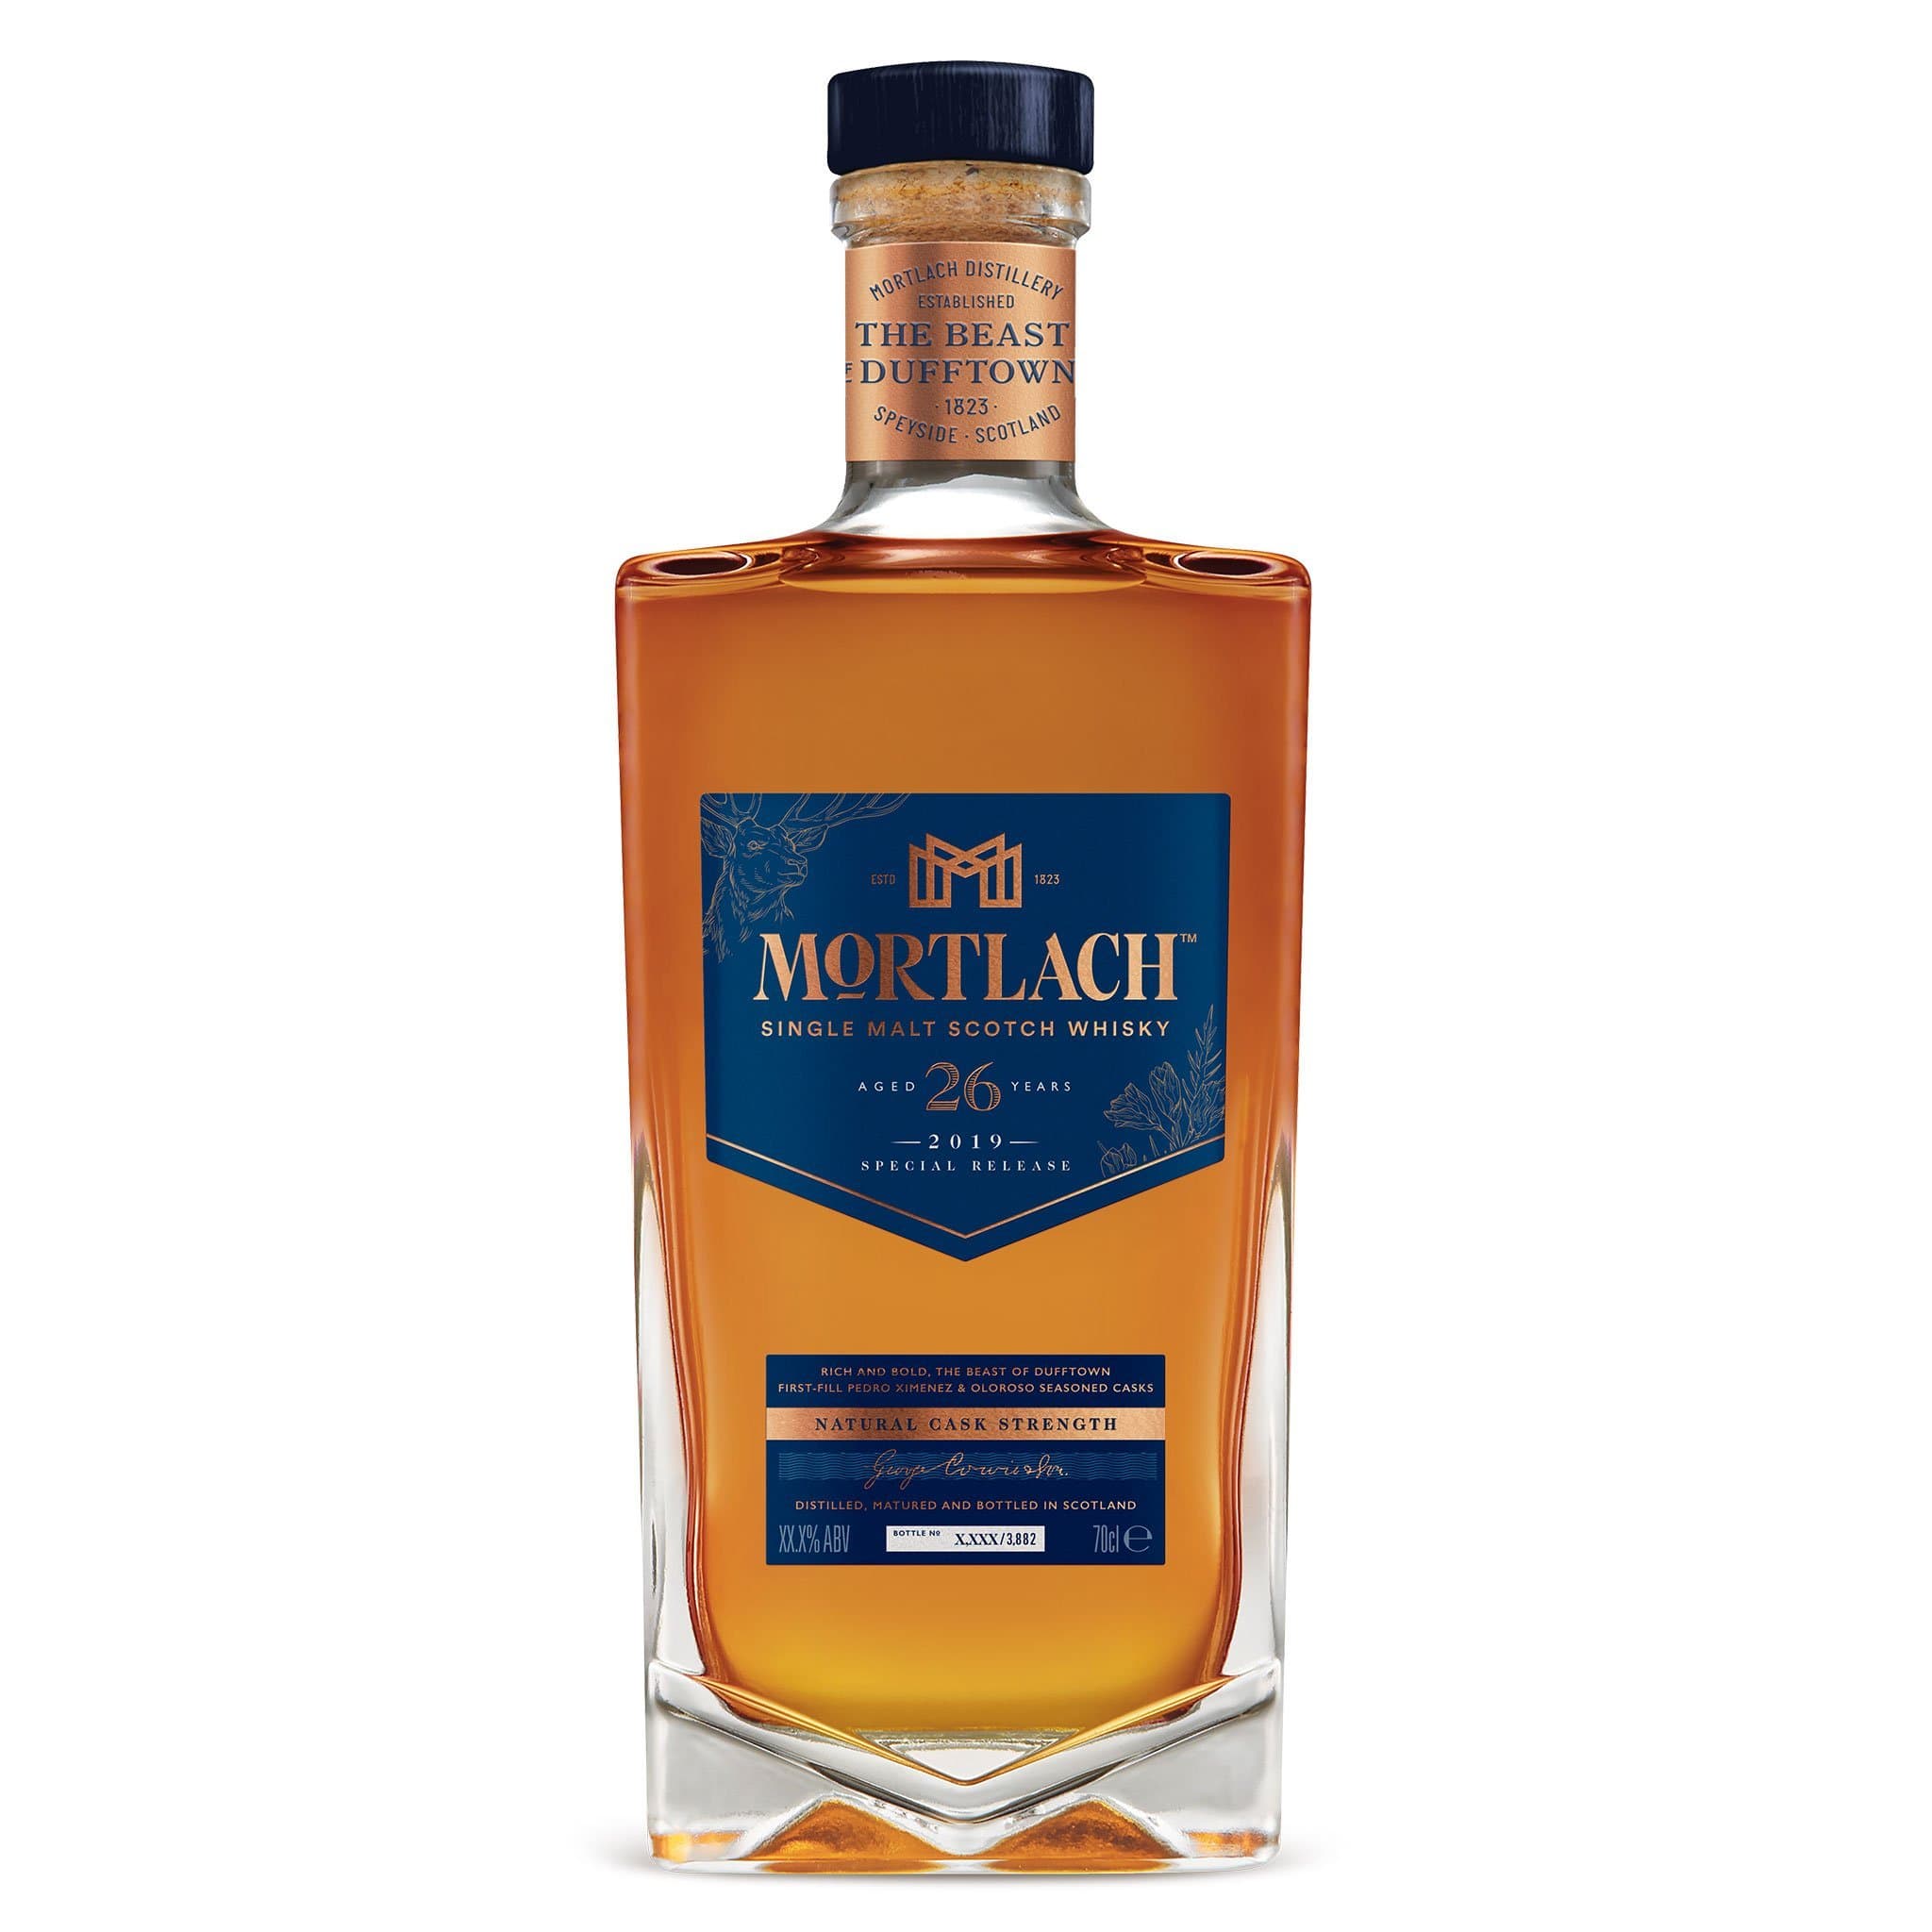 Mortlach 26 Year Old, Special Releases 2019 Bottle